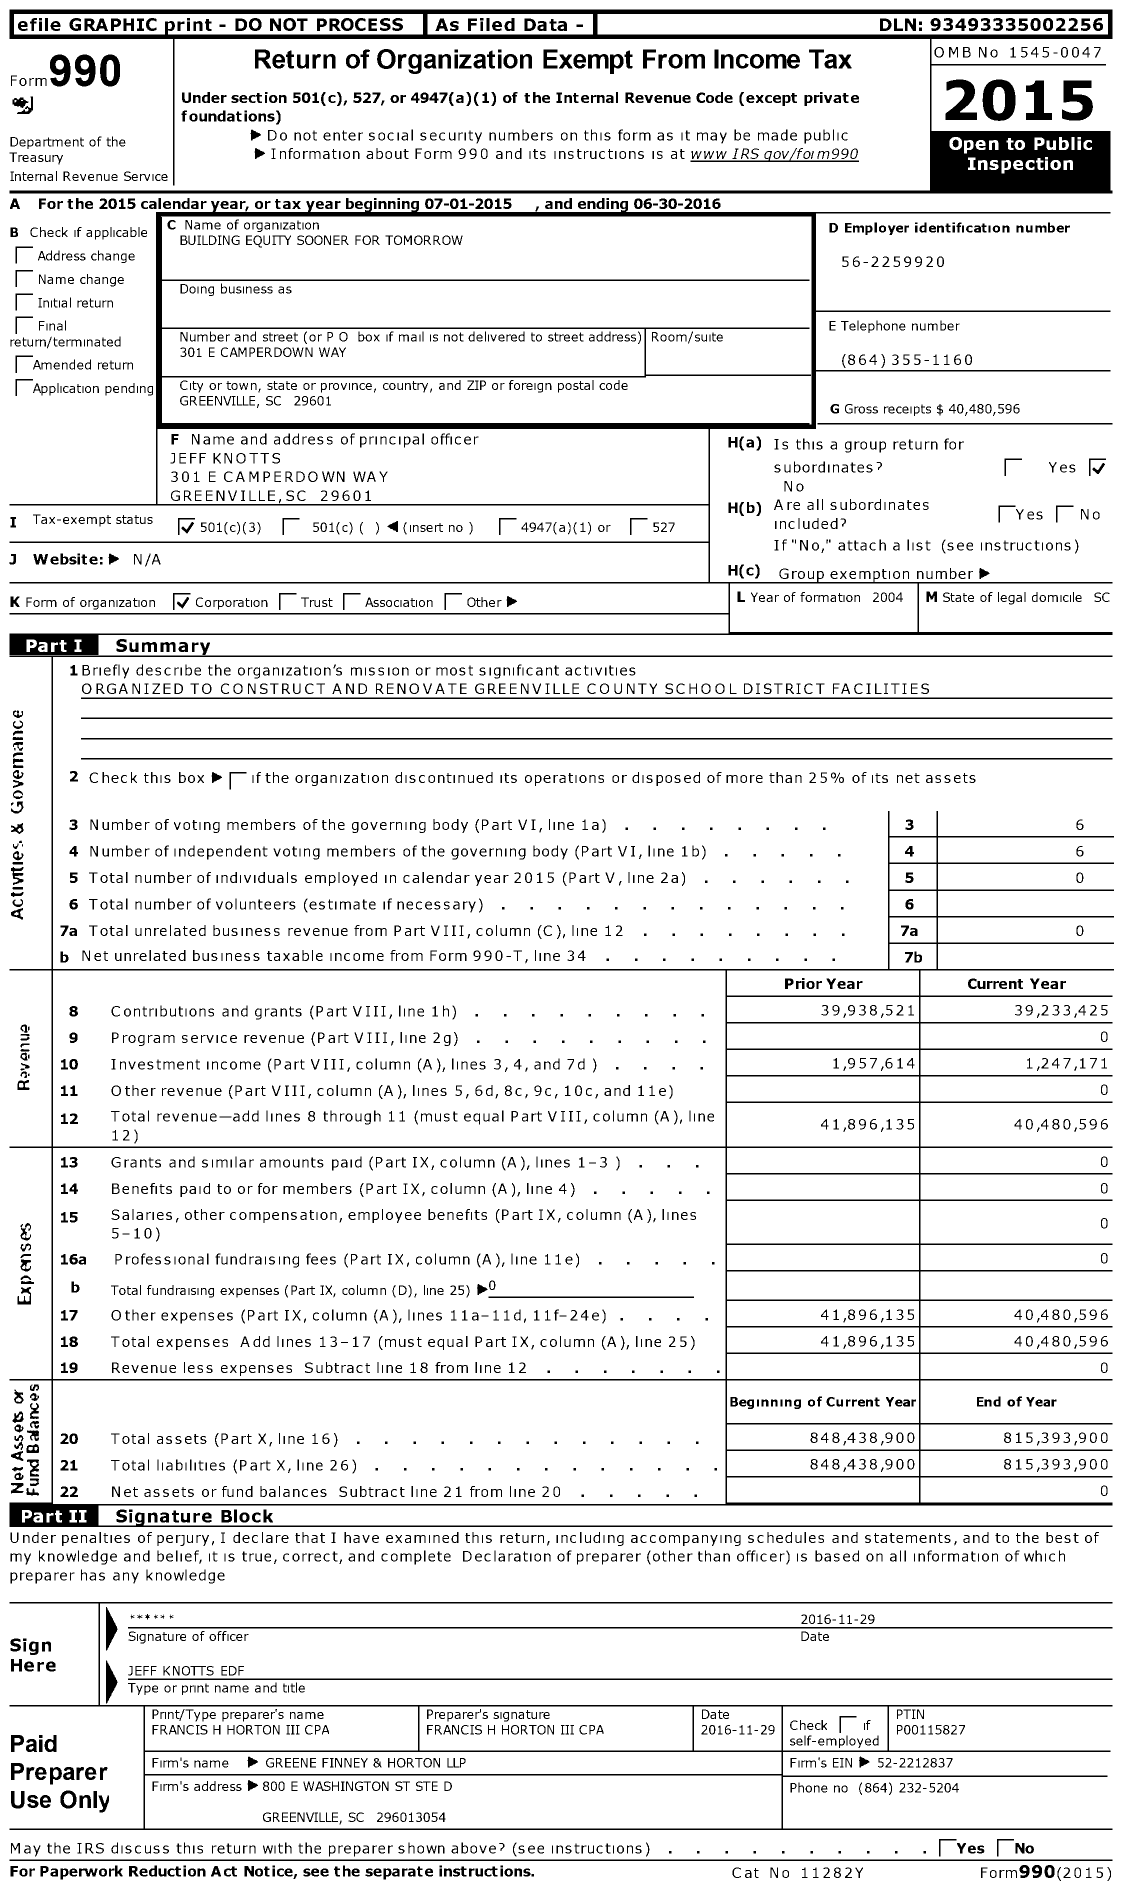 Image of first page of 2015 Form 990 for Building Equity Sooner for Tomorrow (BEST)